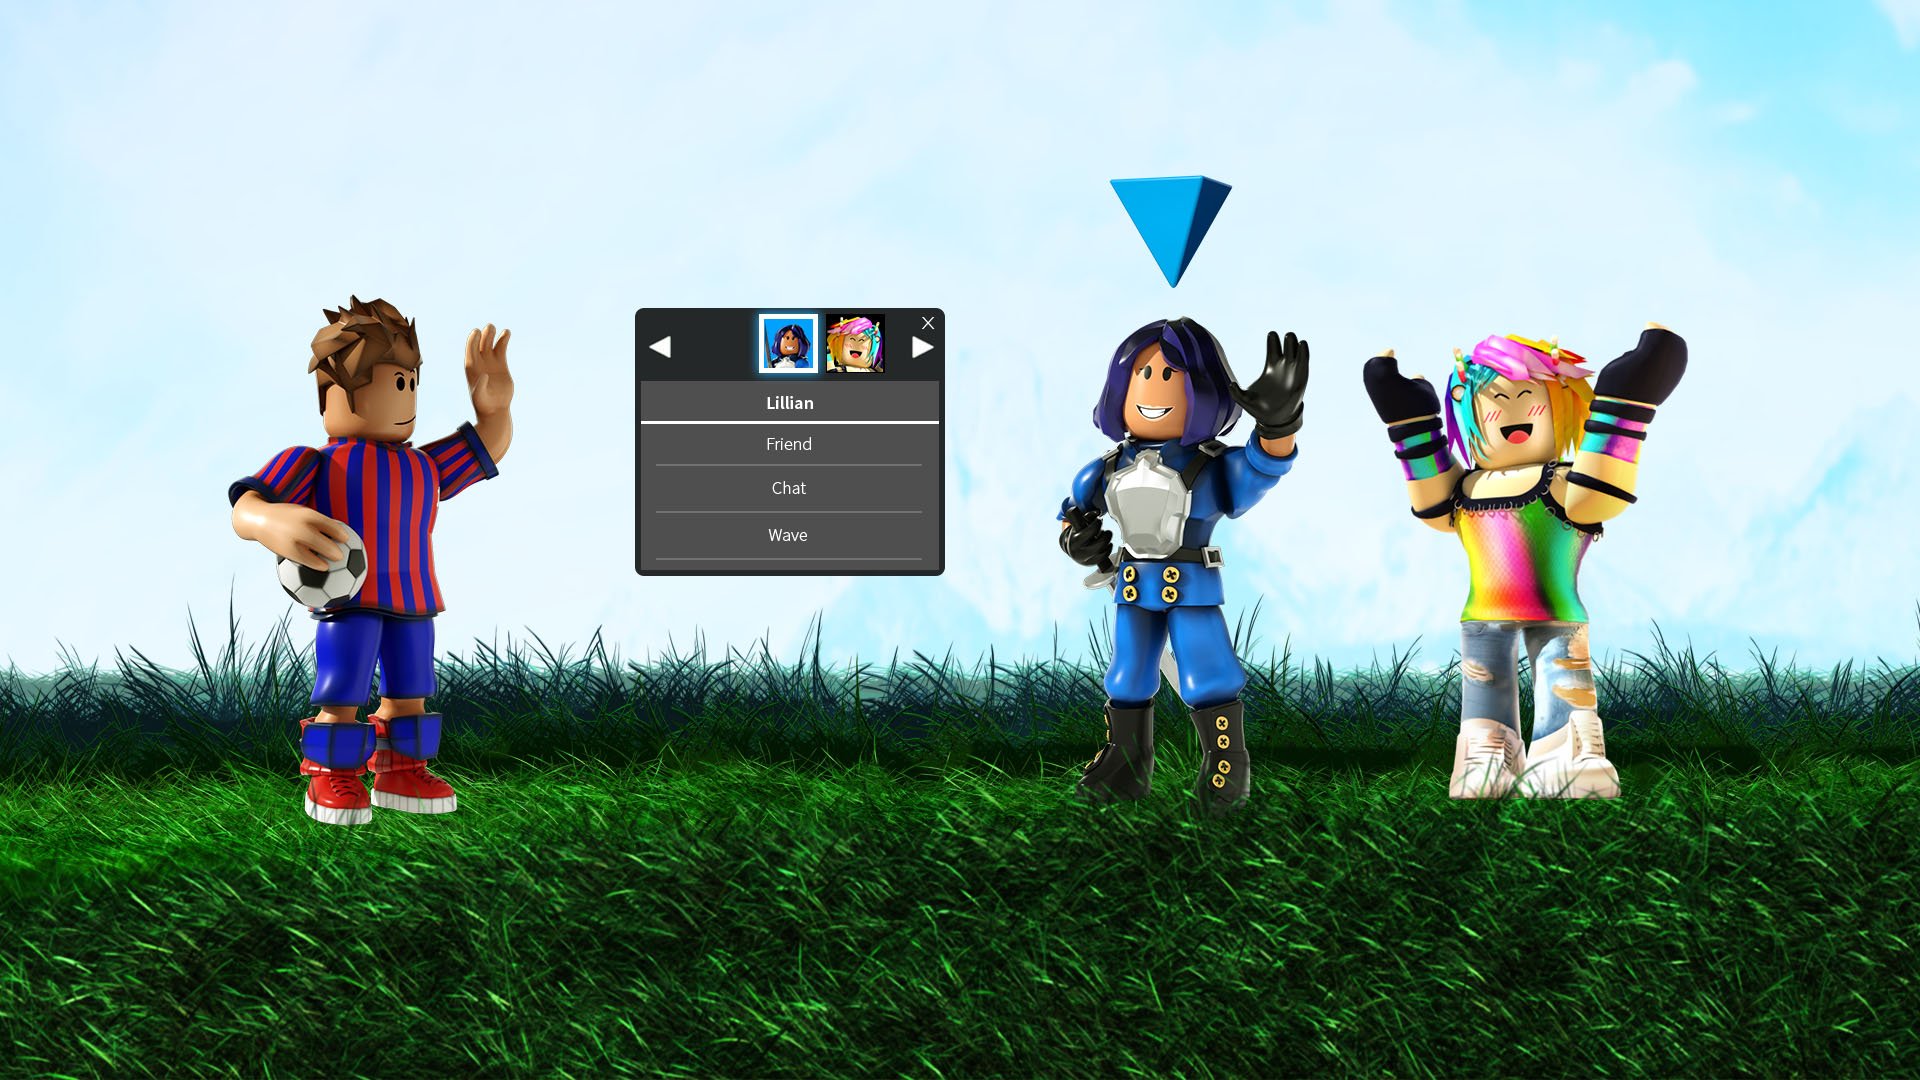 Roblox On Twitter The Avatar Context Menu Is A New Feature That Developers Can Enable In Their Games To Make It Easier To Interact With Other Players Read More On Our Blog - roblox venom avatar